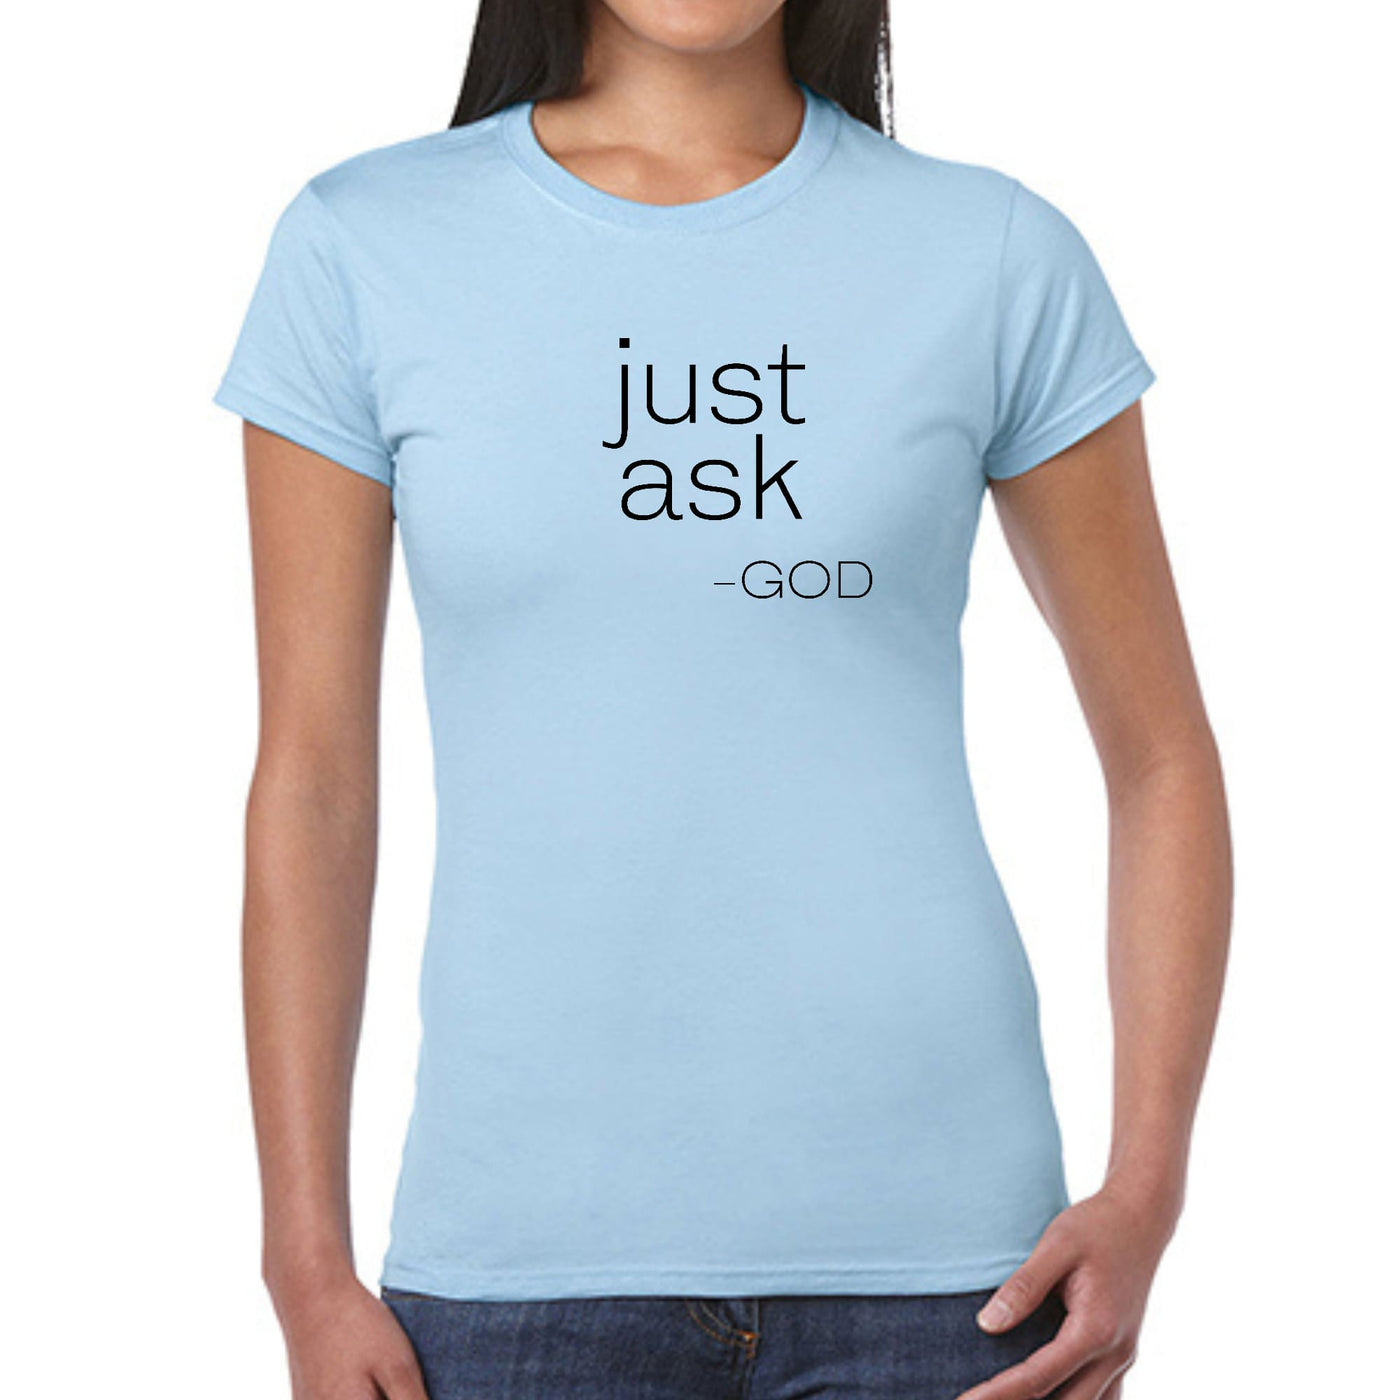 Womens Graphic T - shirt Say It Soul ’just Ask - god’ Statement Shirt, - T